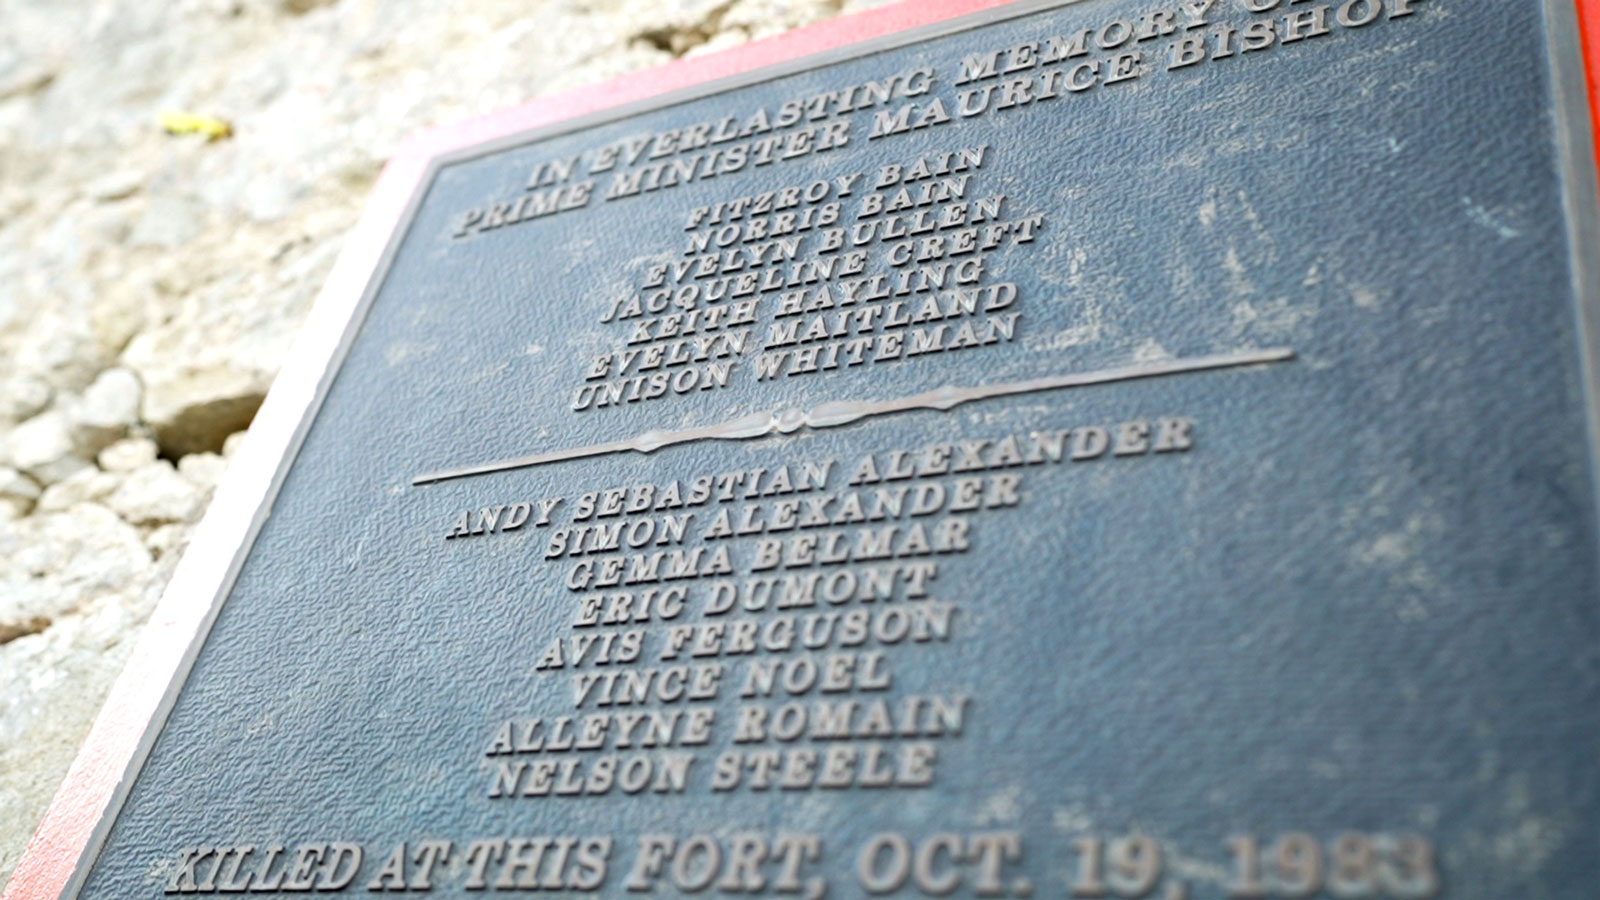 Commemorative plaque for Prime Minister Maurice Bishop and his ministers who were executed at Fort George in Grenada on Oct 19, 1983 (IBW21/File Photo)